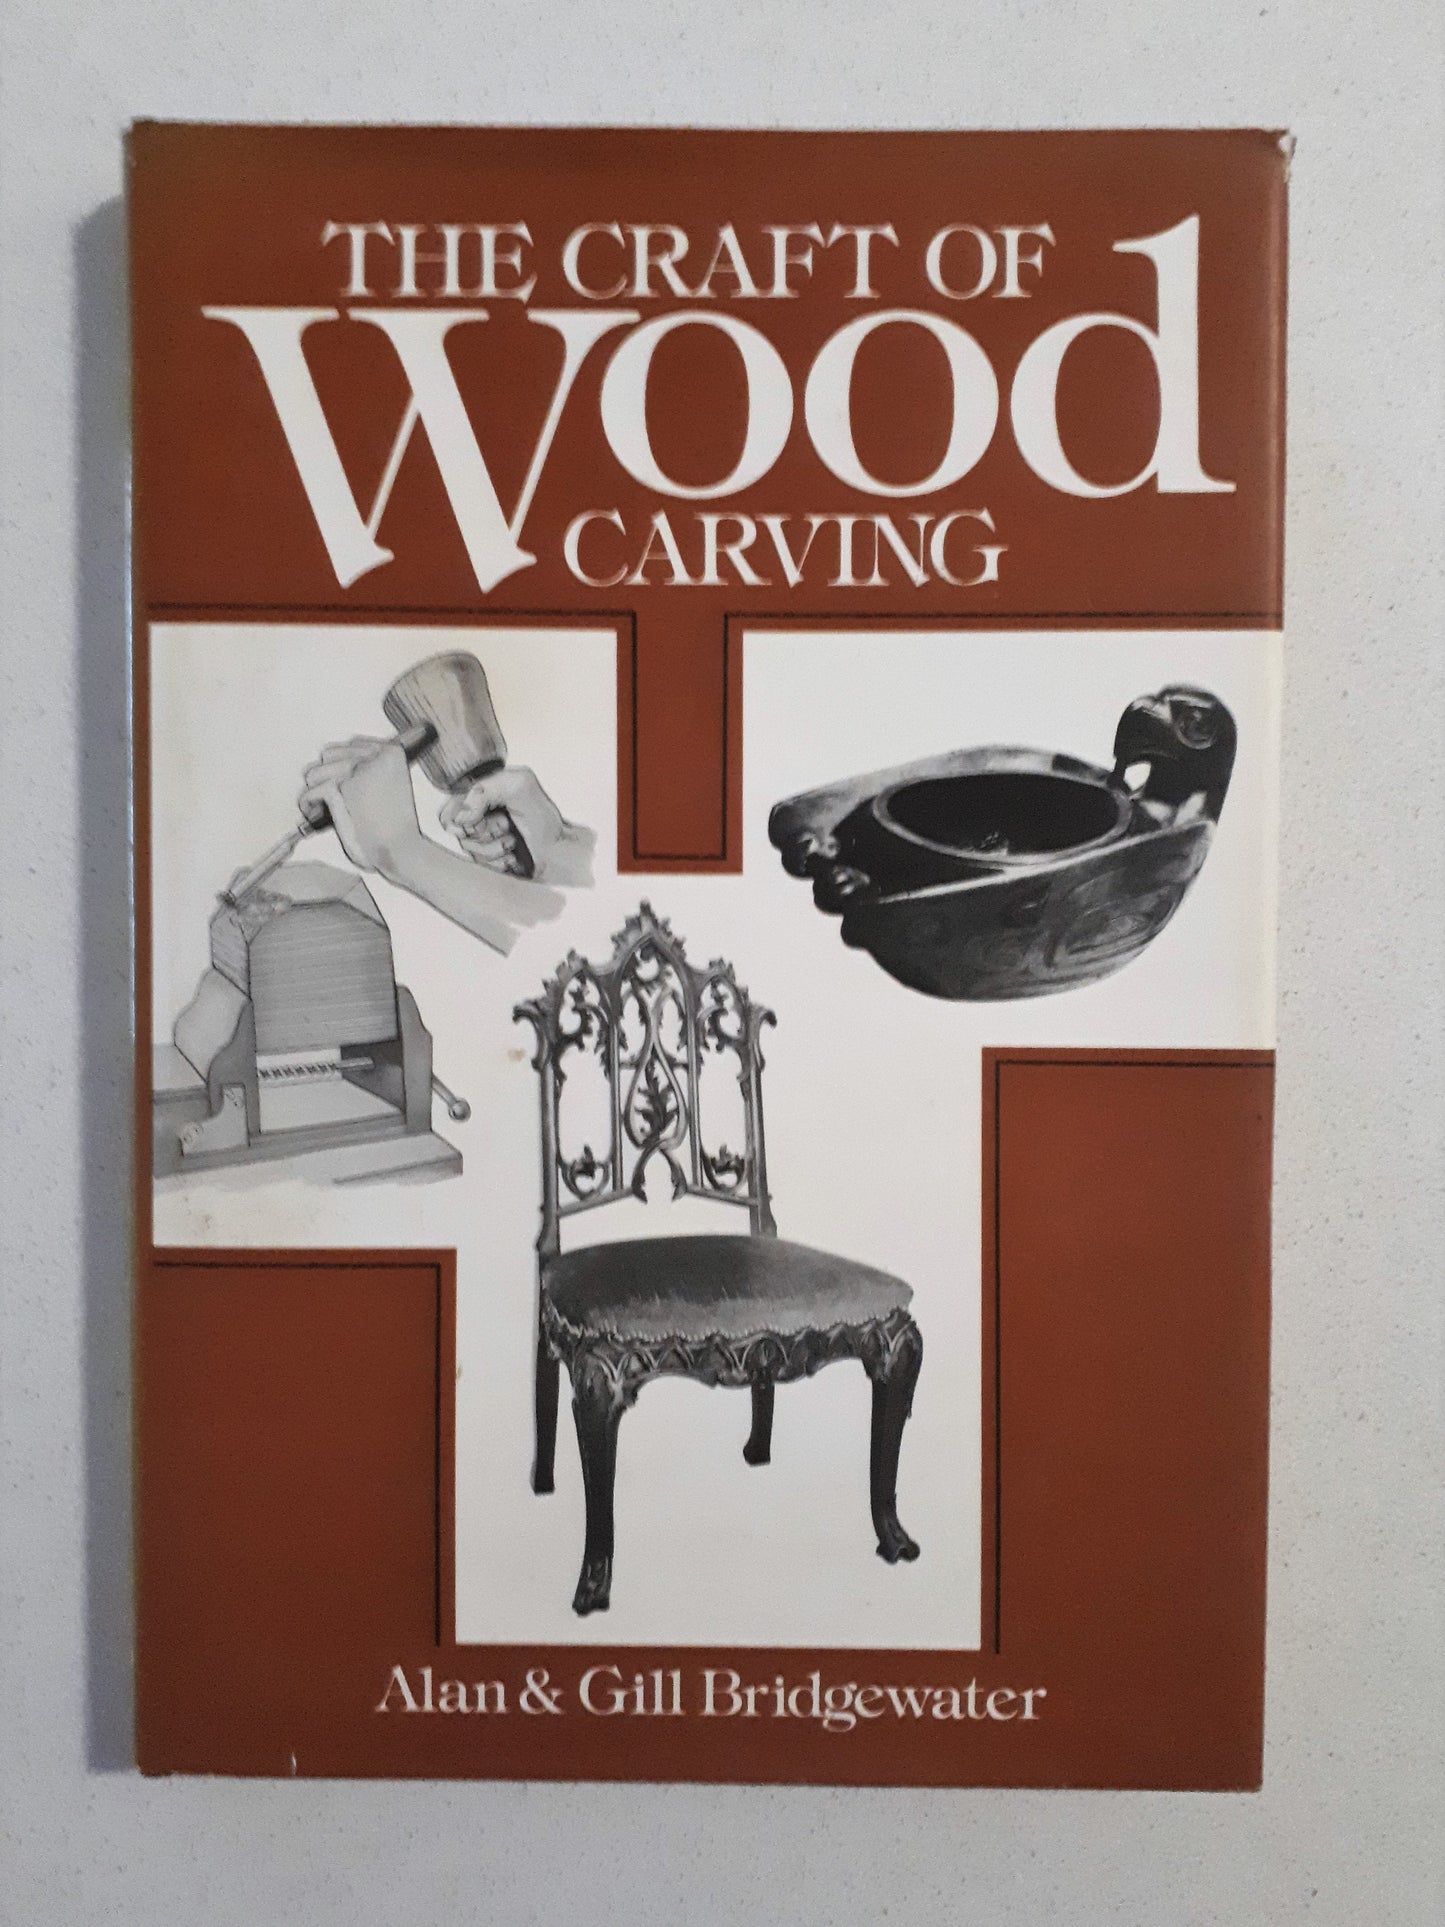 The Craft of Wood Carving by Alan & Gill Bridgewater